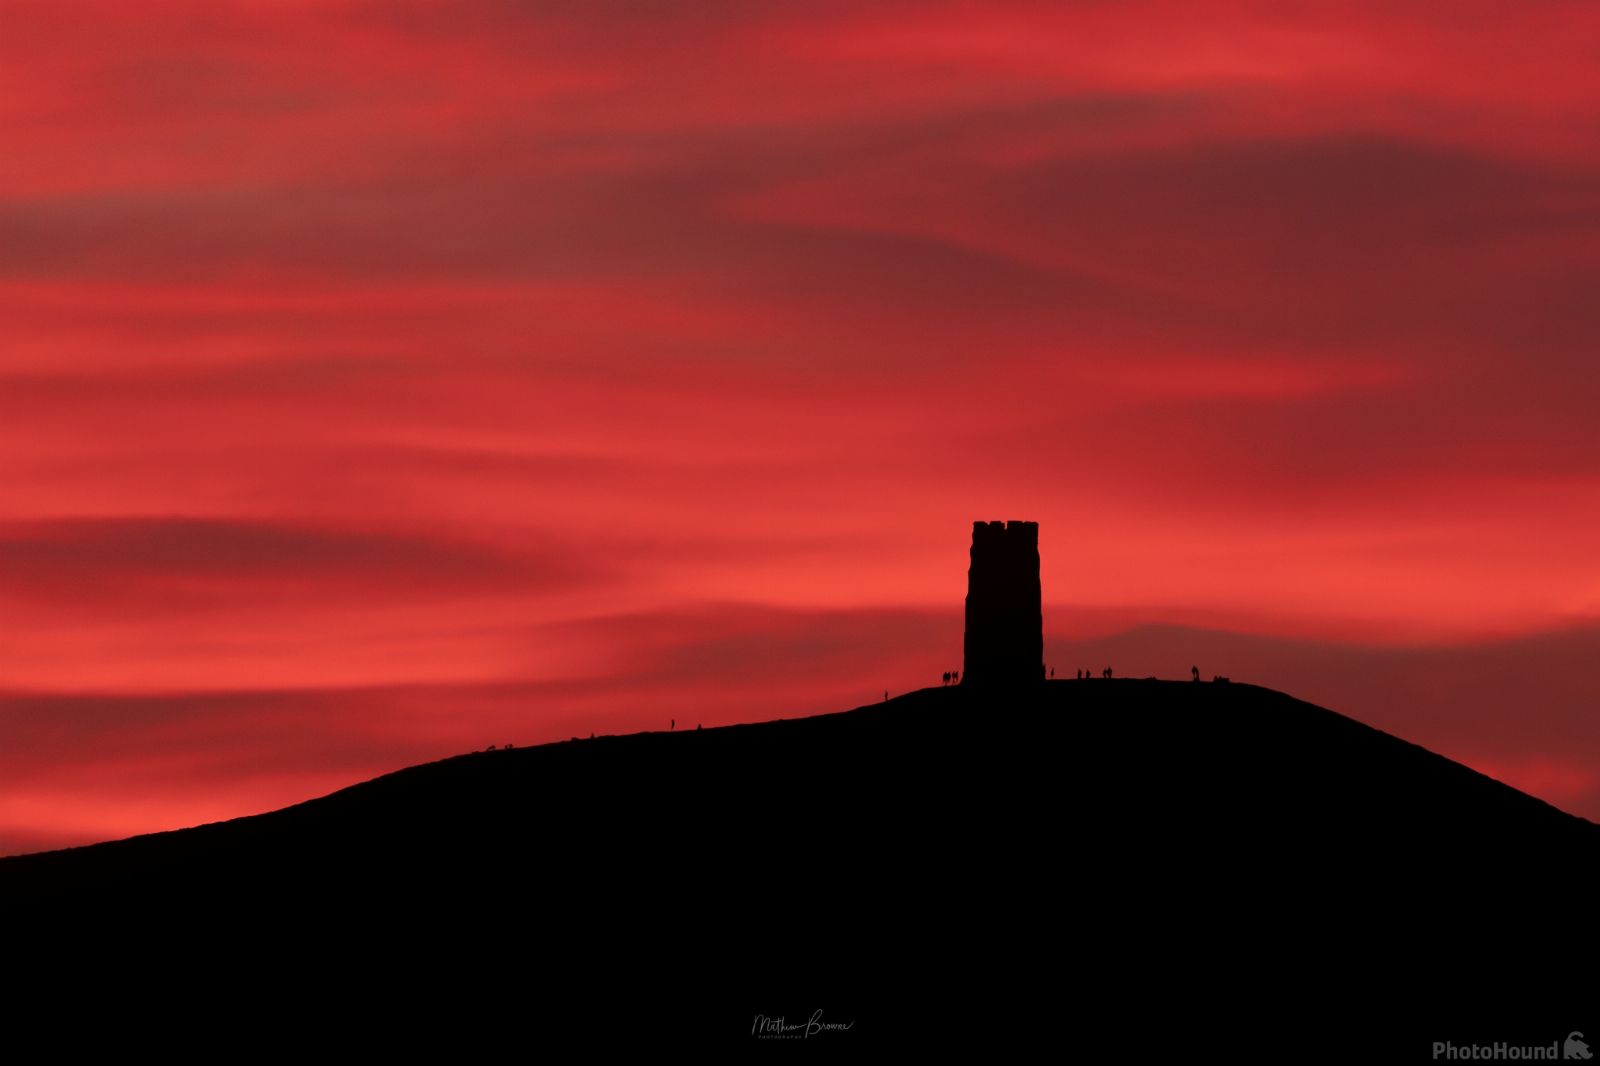 Image of Glastonbury Tor from the Canals by Mathew Browne